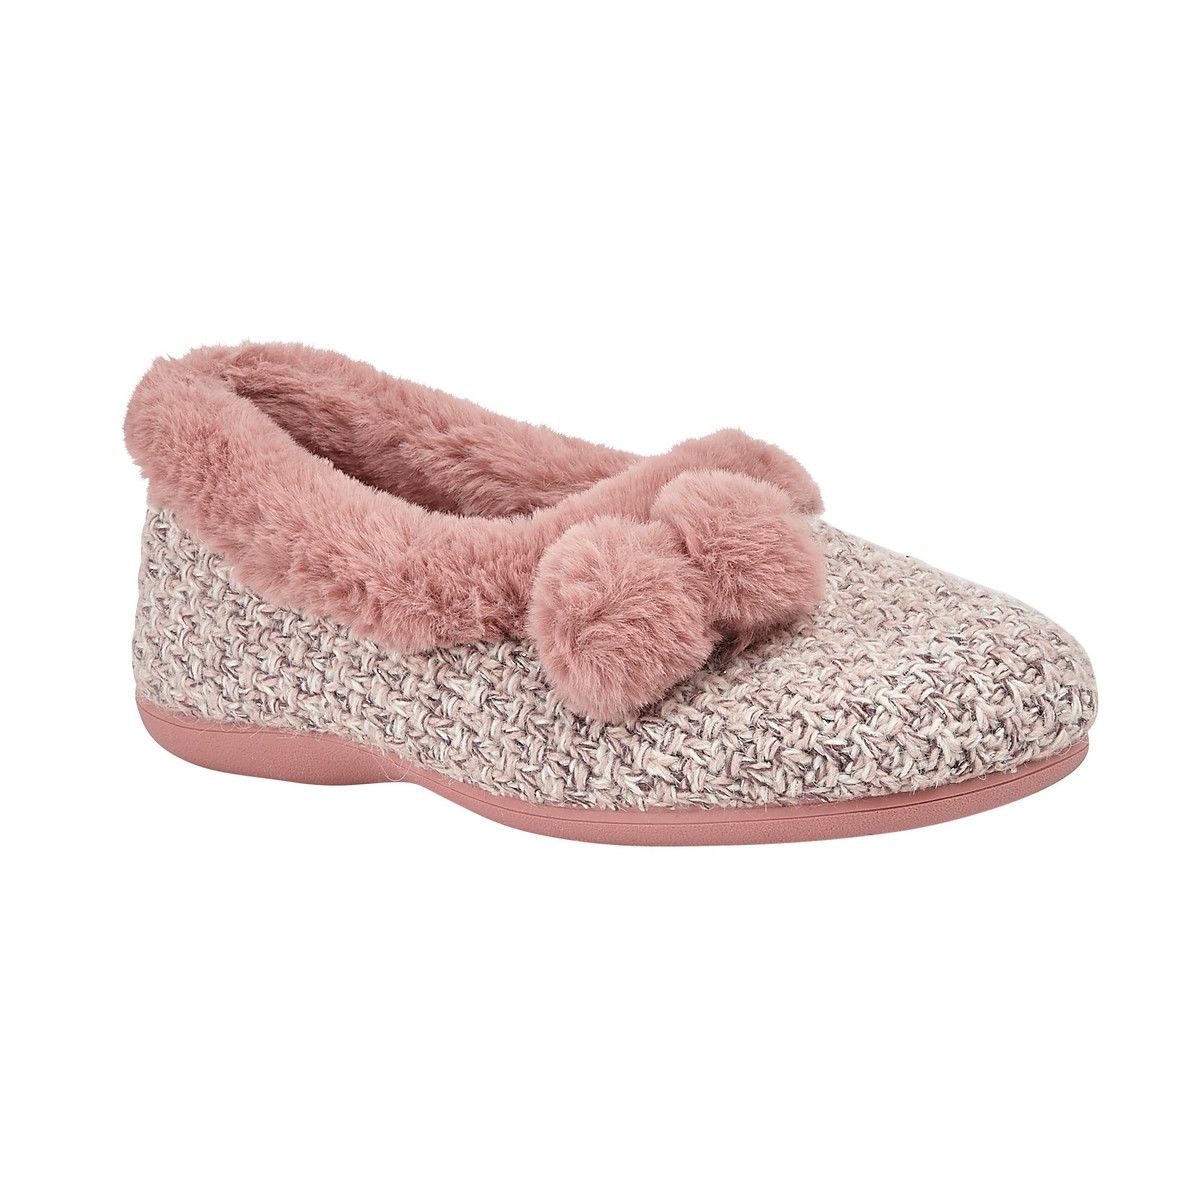 Lotus Alice Pink Womens slipper mules in a Plain Textile in Size 5